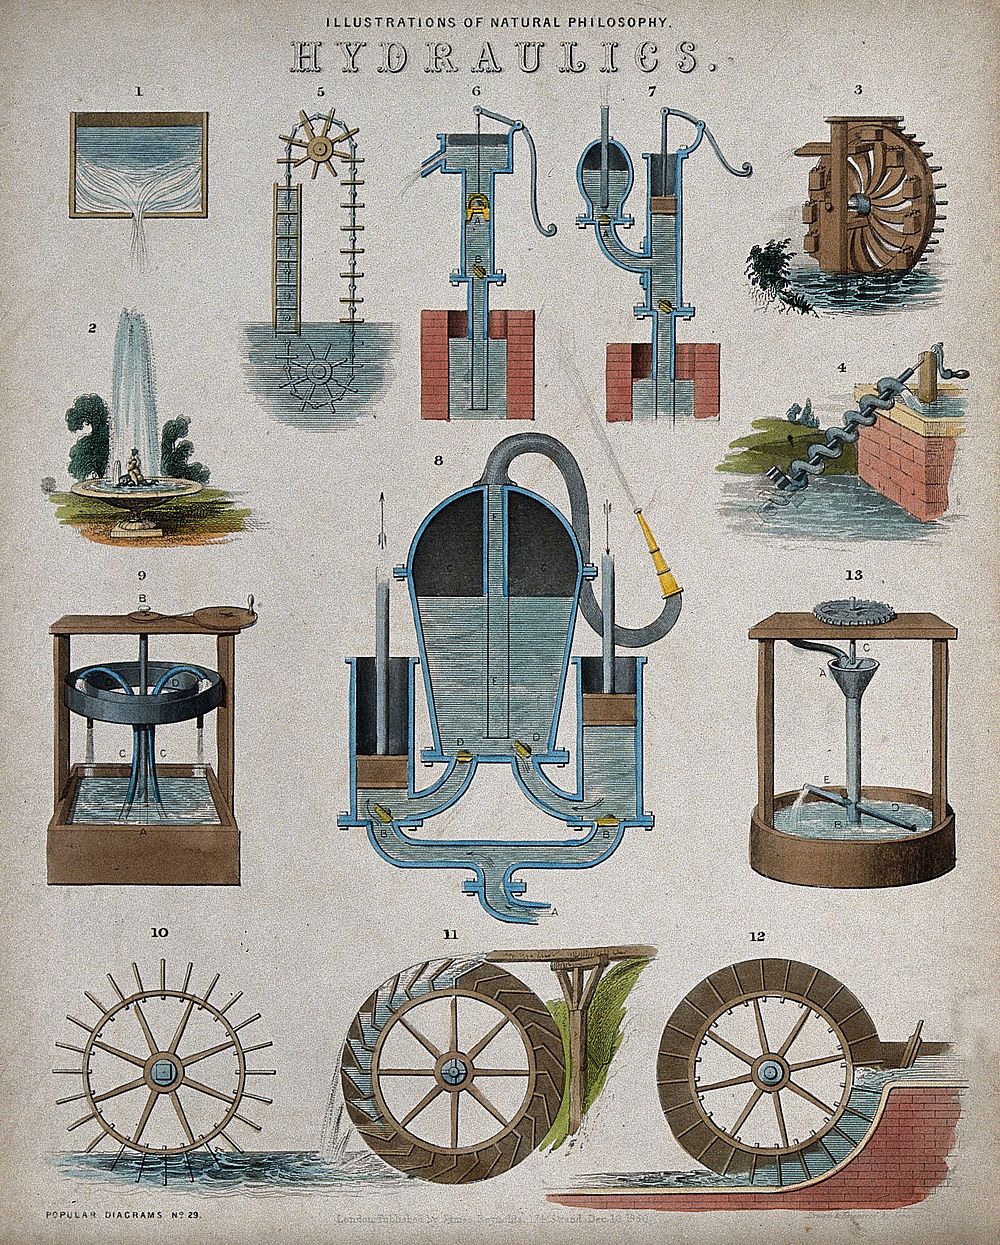 Hydraulics: hydraulic equipment. Coloured engraving by J. Emslie, 1850, after himself.